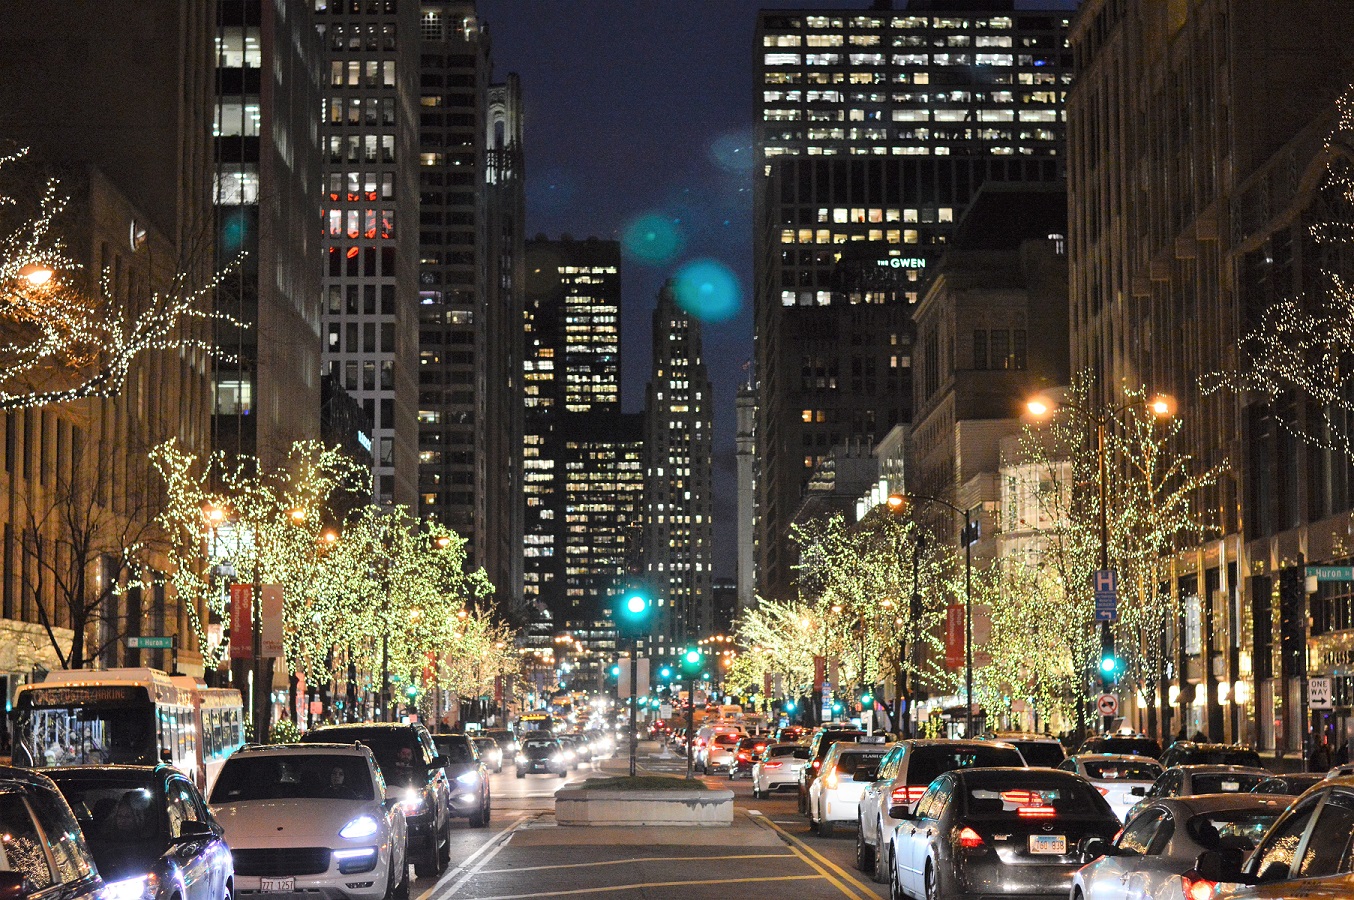 Nighttime on the Magnificent Mile in Chicago, Illinois